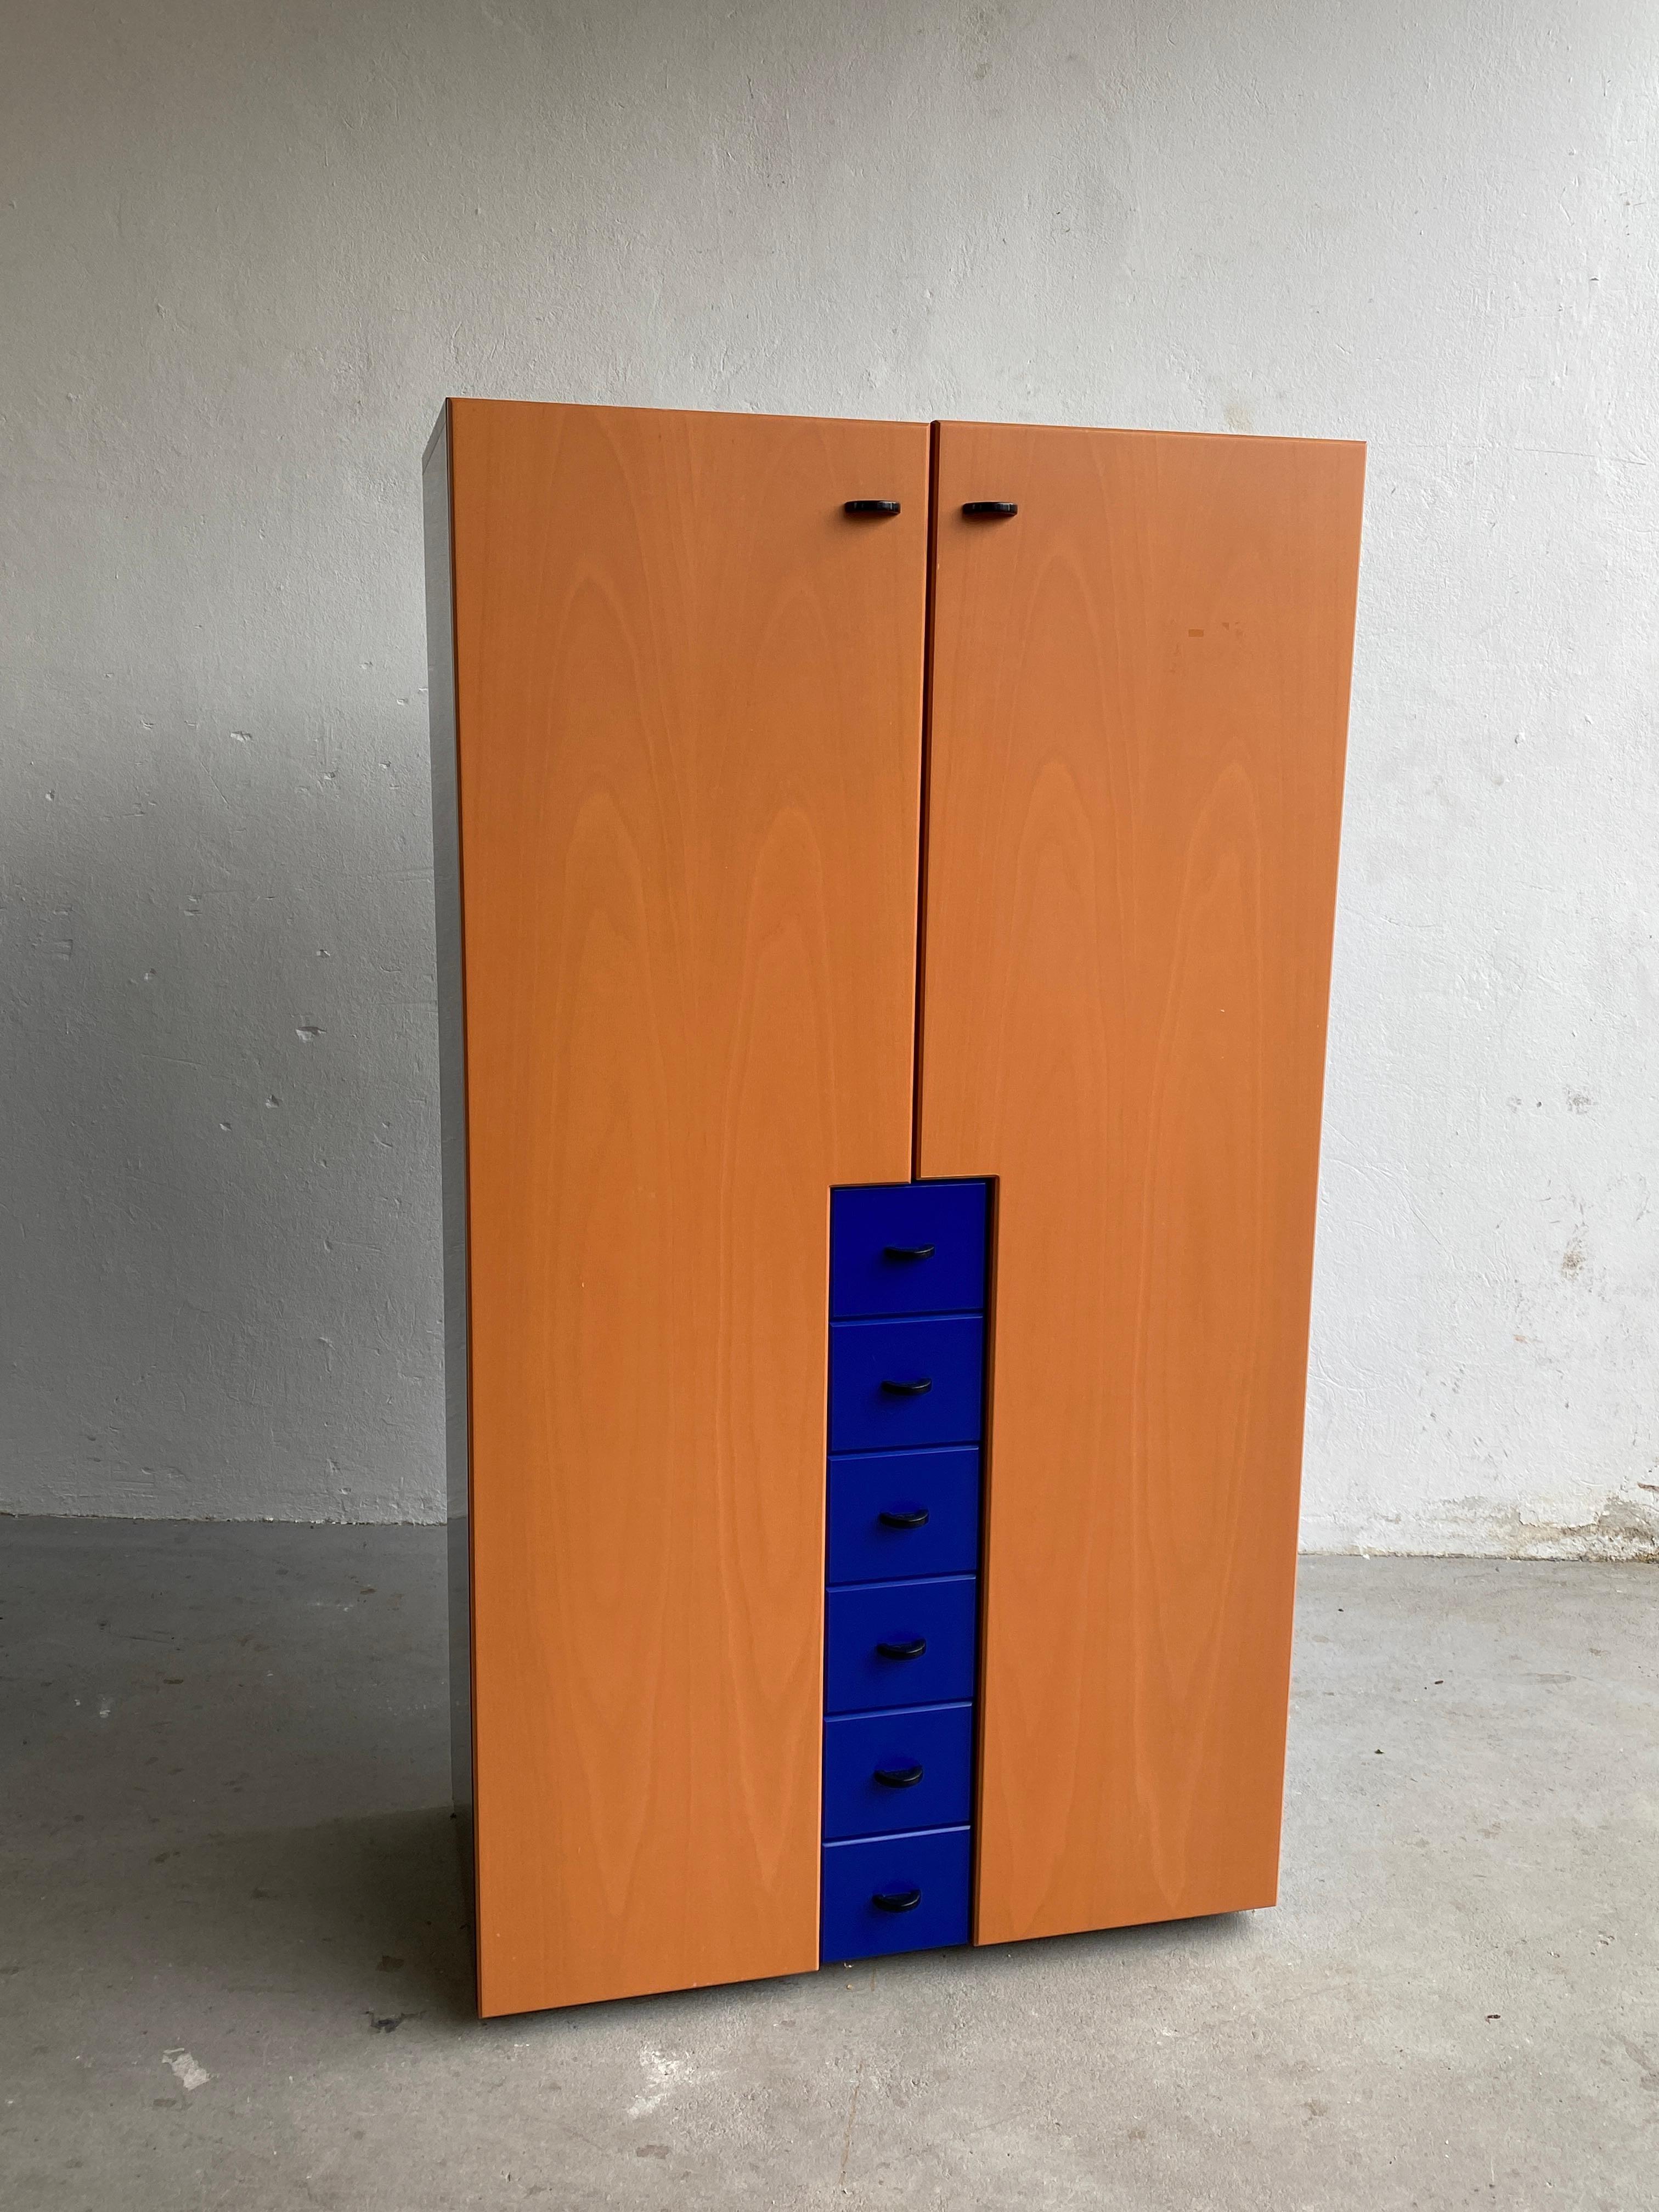 Post modern home closet or storage cabinet by Interlübke, designed by Peter Maly. 1980s, Germany. 

Eye catching and rare piece of postmodernist furniture with striking colours. Labeled on the handles.

Overall very good vintage condition with